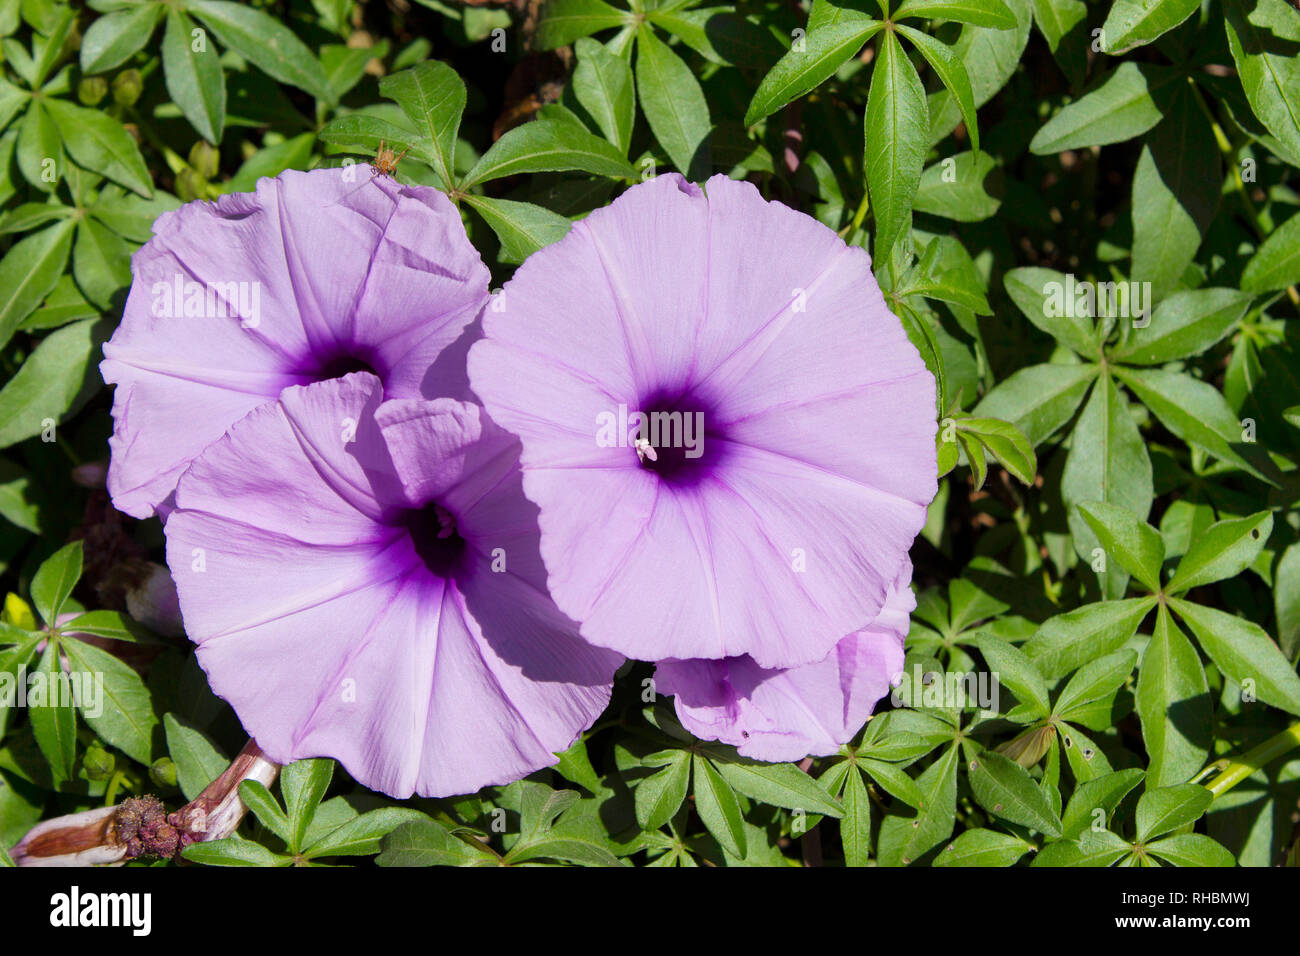 Top view close-up of Cairo Morning Glory, Indian Breed Stock Photo